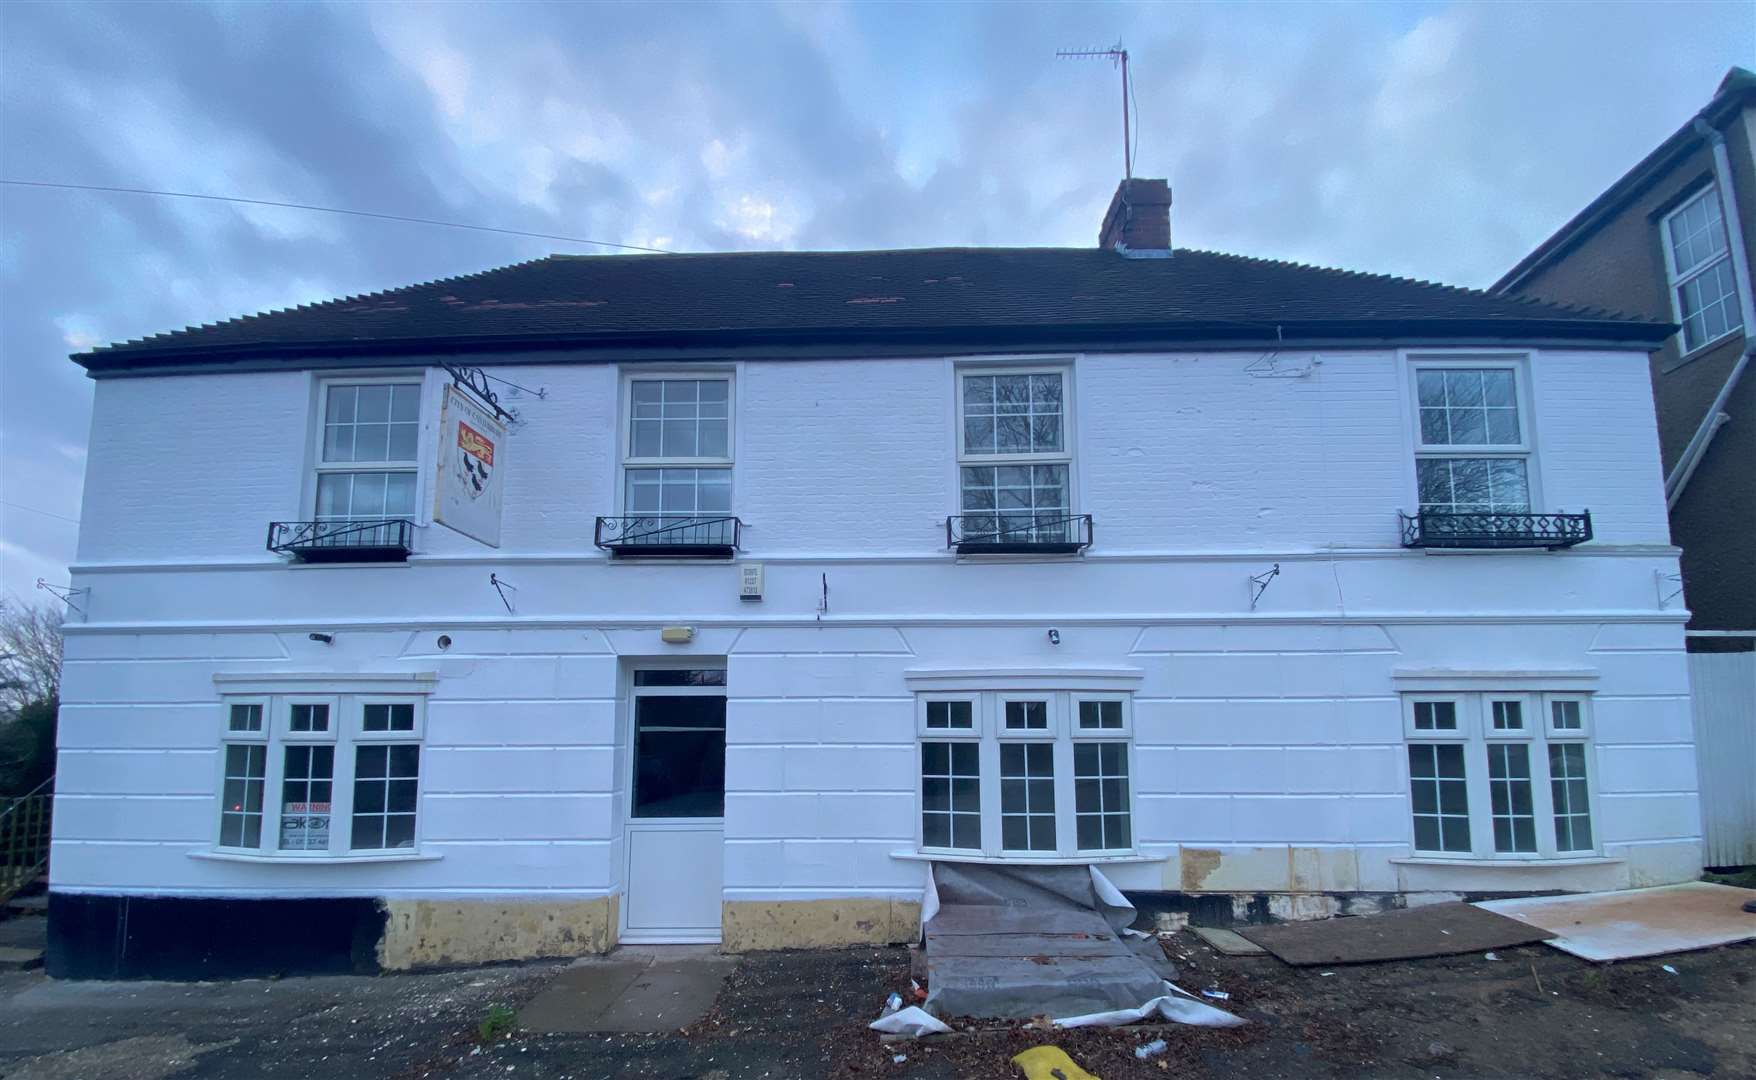 A formerly derelict building on St Thomas Hill, Canterbury, will be restored as a B&B once again